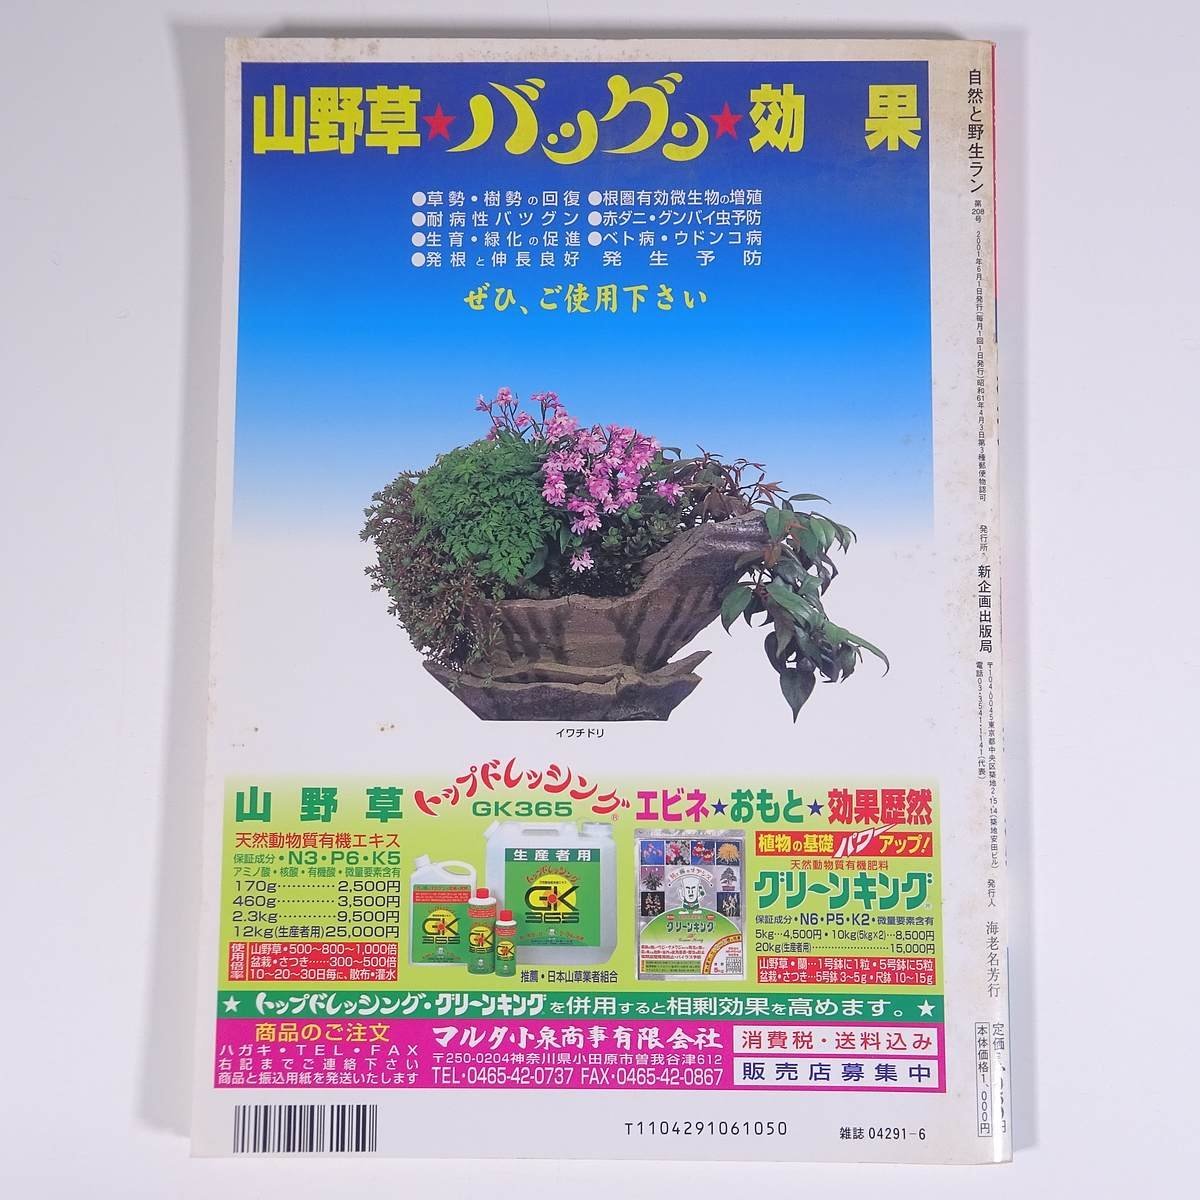  nature .. raw Ran No.208 2001/6 new plan publish department magazine gardening gardening plant orchid Ran special collection * shelves place making spring orchid . goods . entering plant another 